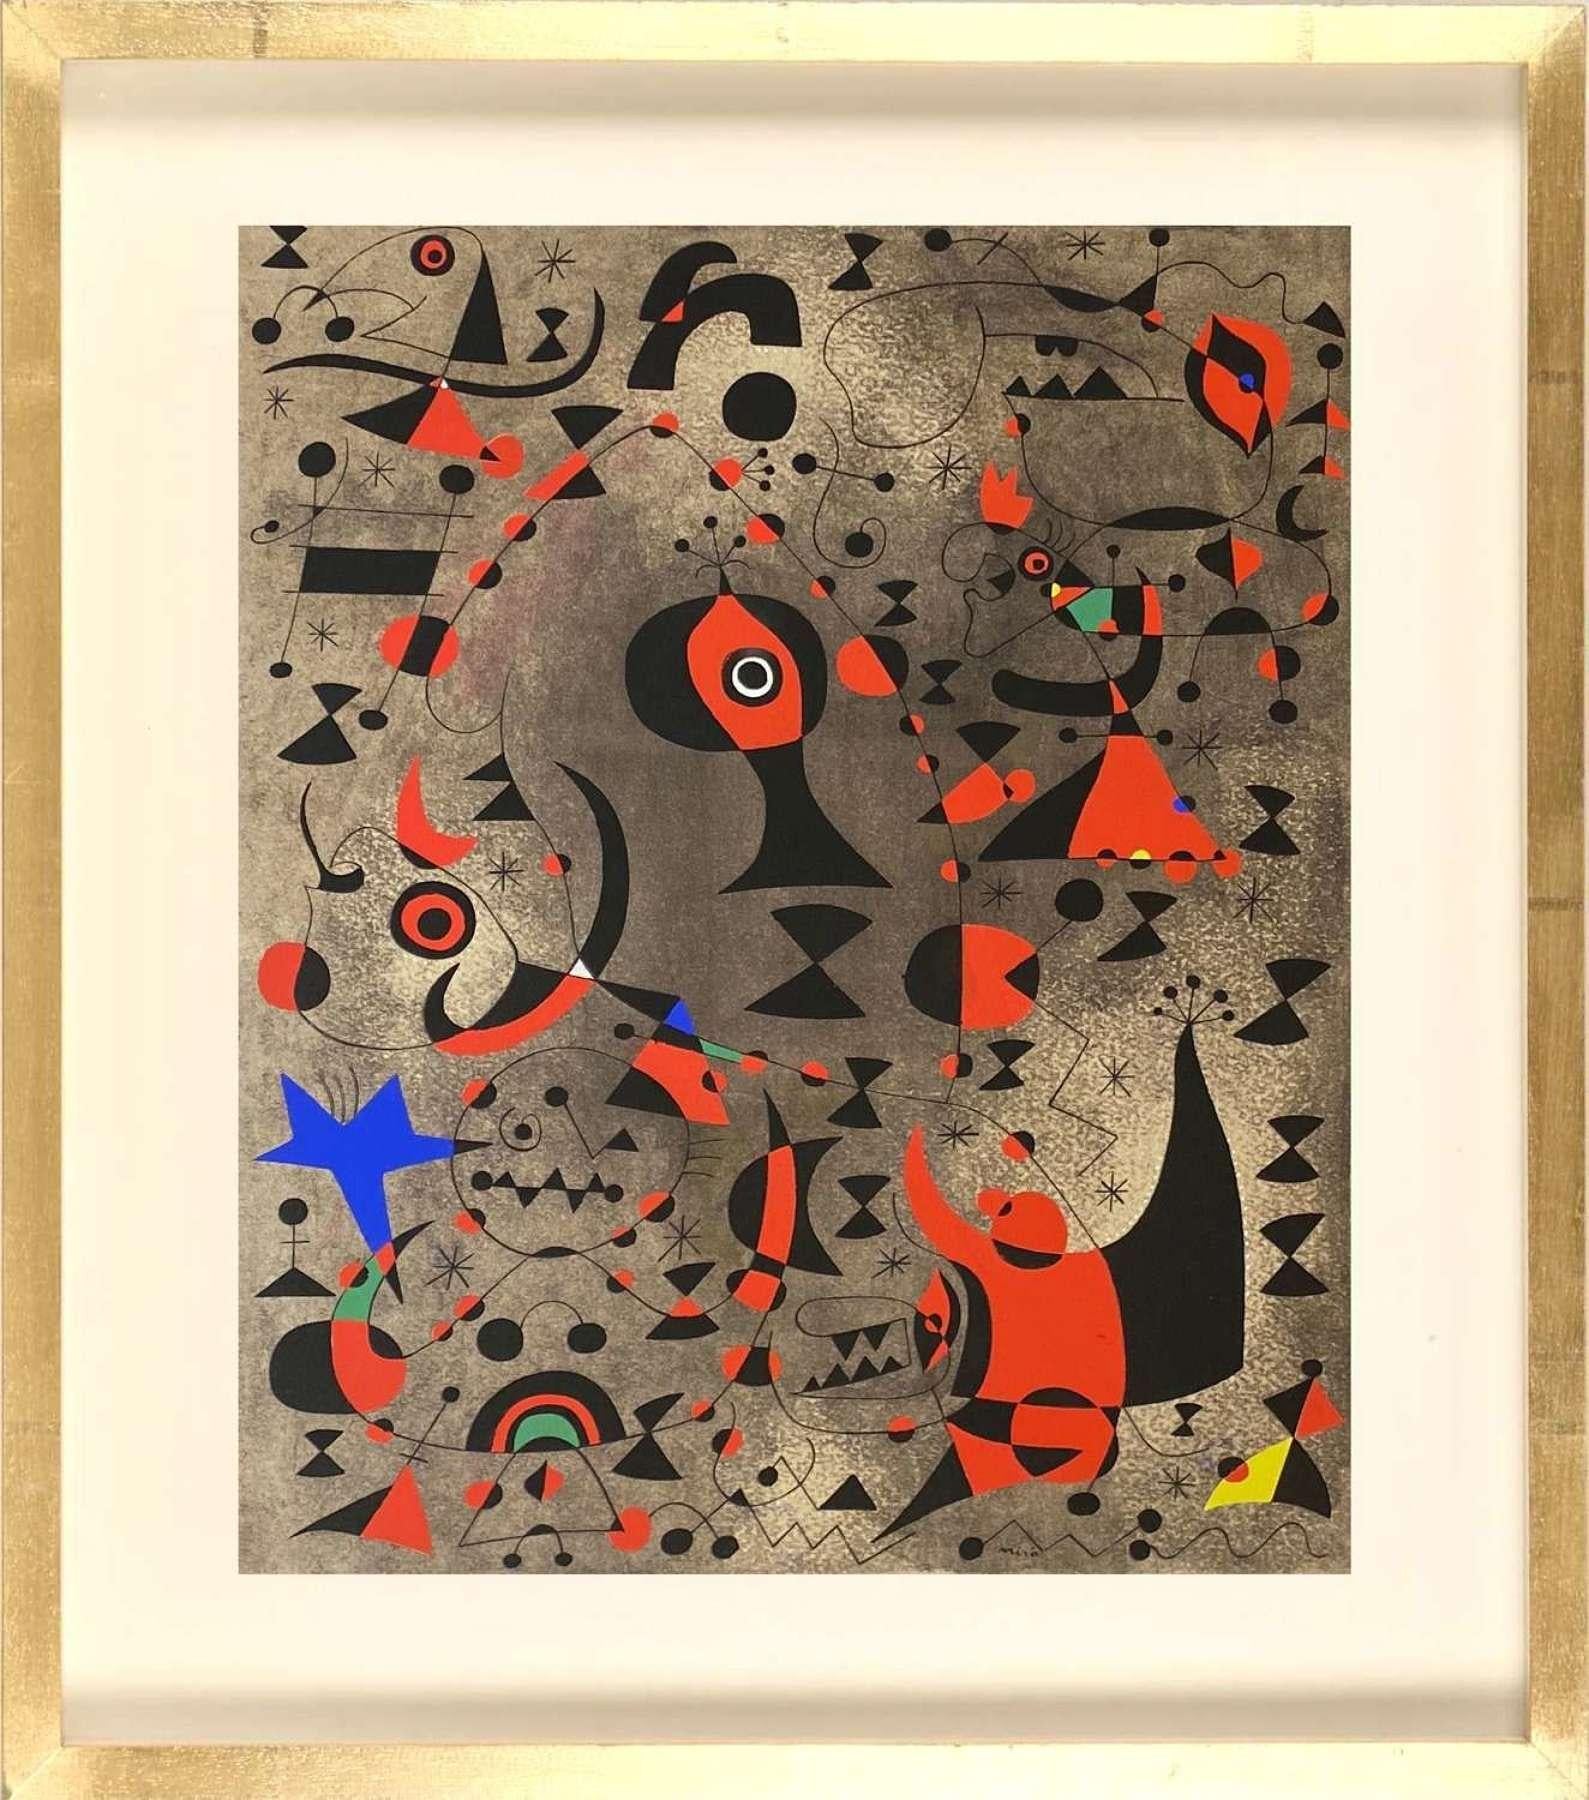 The twenty-two paintings known as the "Constellations" were begun by Miro in Normandy, France in 1939 at the outbreak of the Second World War and completed in Barcelona two years later after Miró and his family had been forced to flee France in the